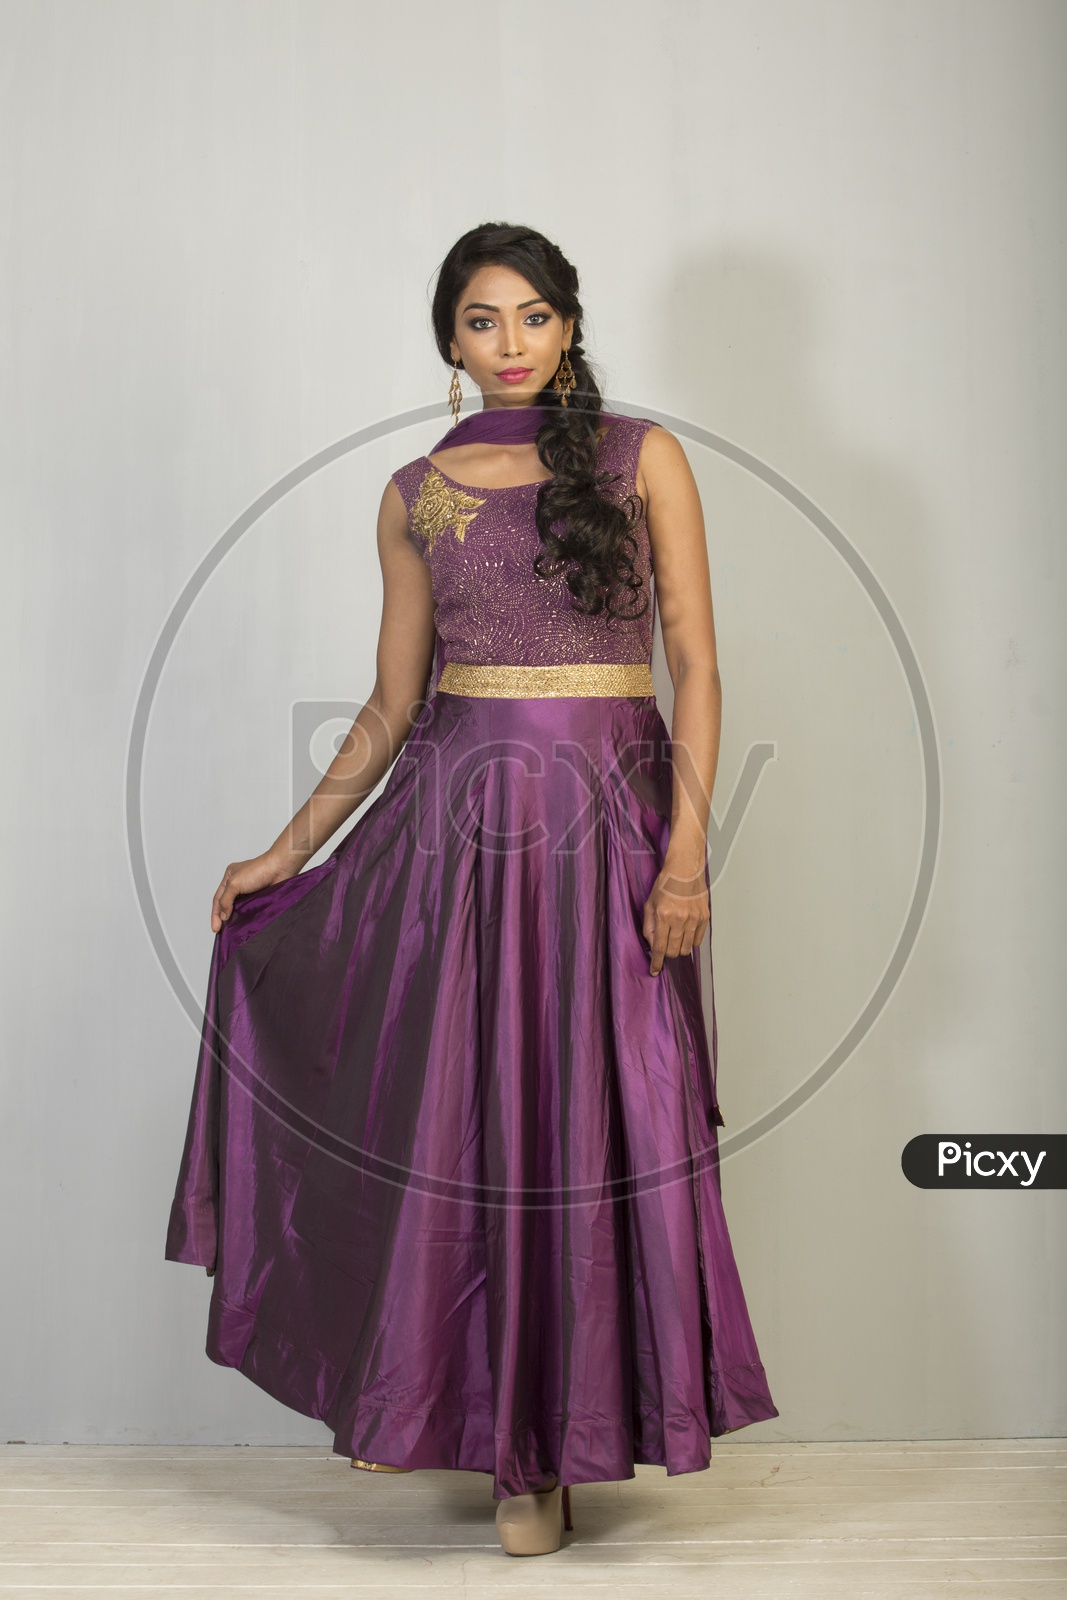 An Indian Female Model Wearing a Lavender  Chudidar Over  a Studio Setup and Smiling Looking to Camera